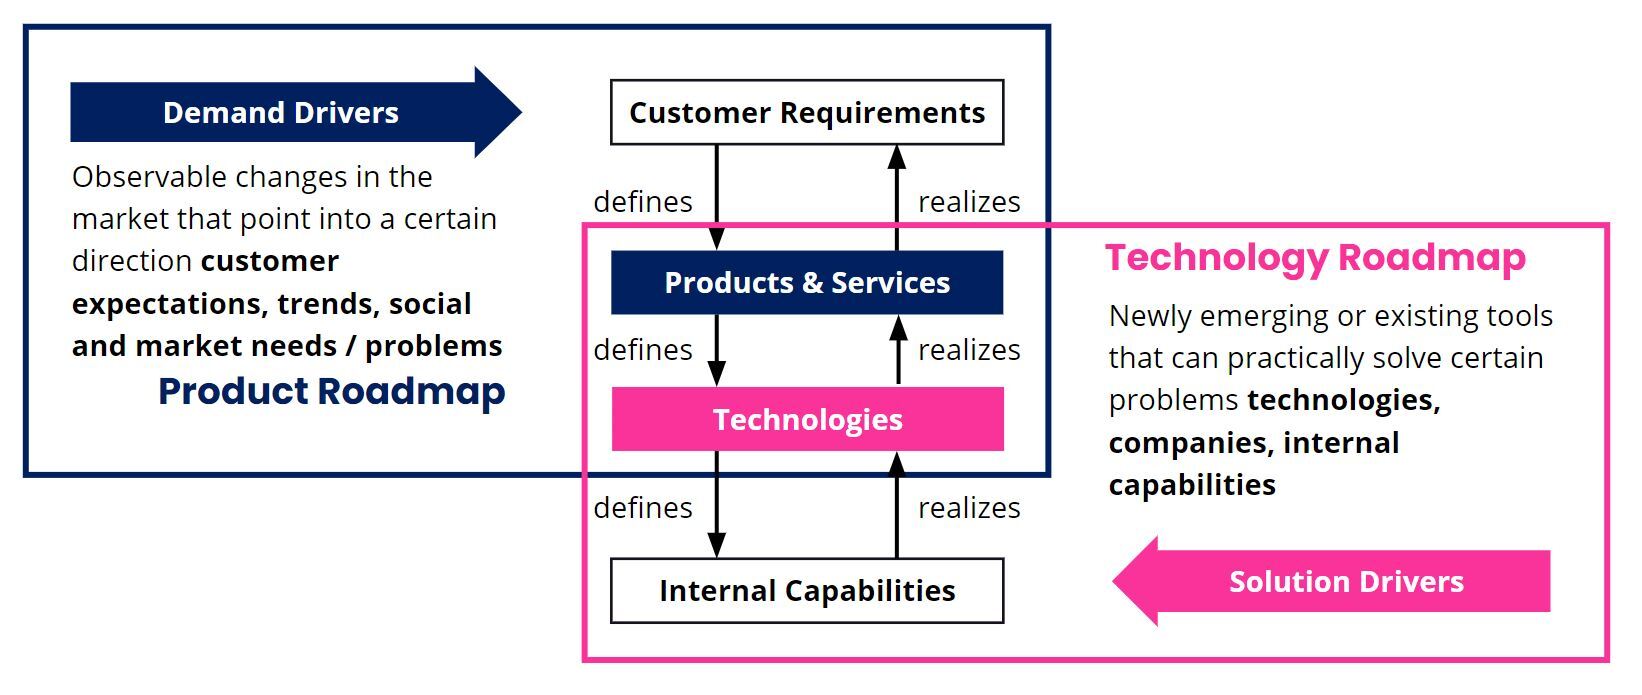 Demand and Solution Drivers in Innovation